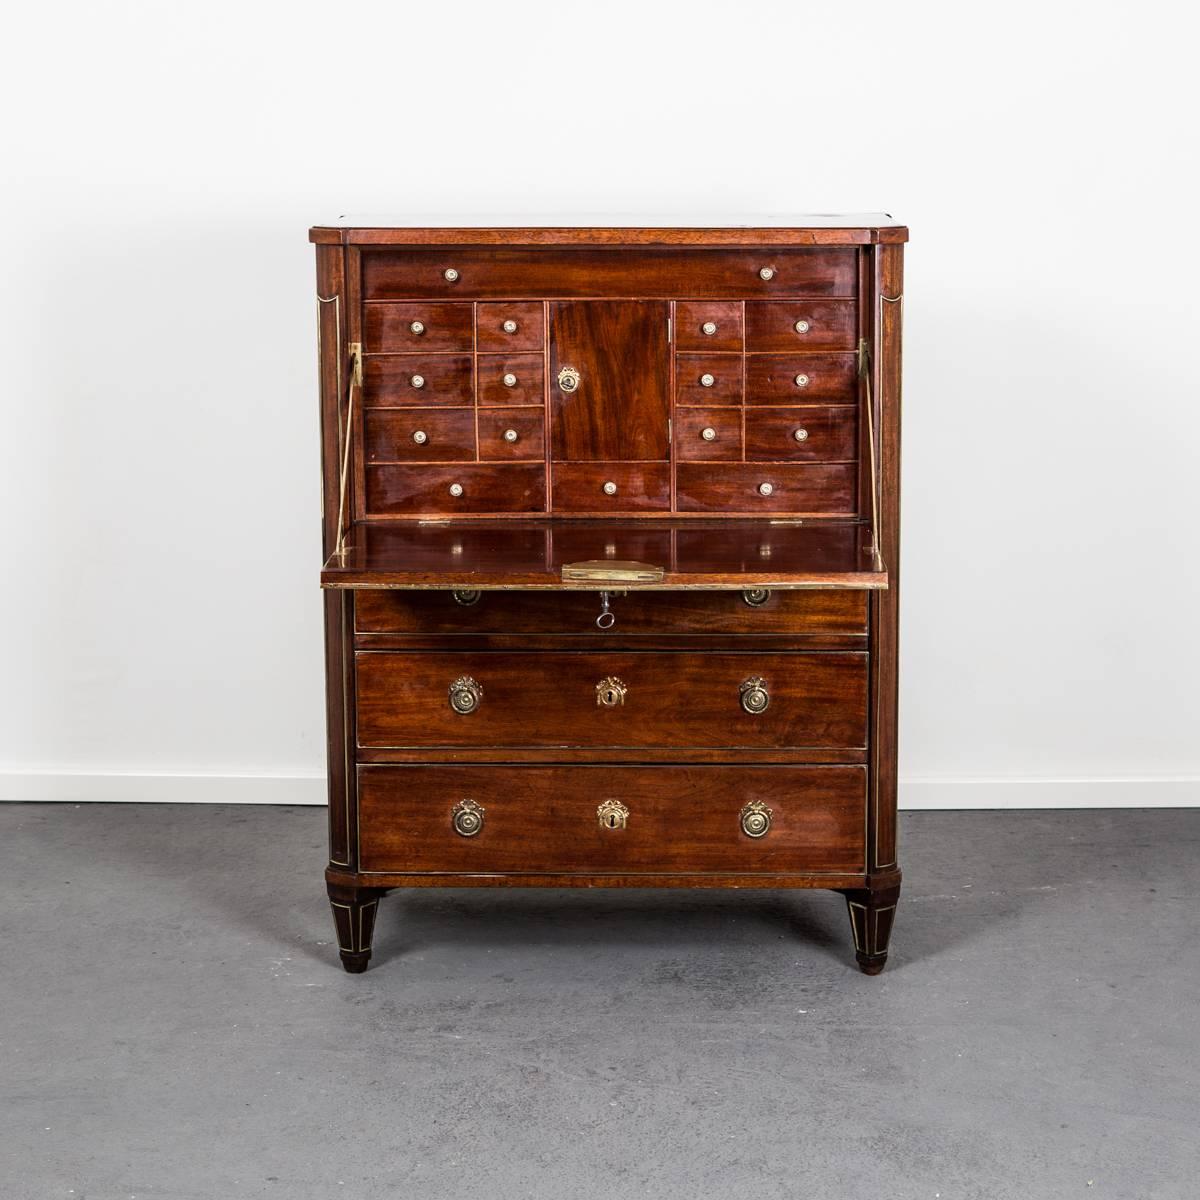 Secretary Swedish Gustavian mahogany, Sweden. A beautiful secretary made in Sweden during the Gustavian period 1775-1810 in mahogany. Details and hardware in brass. Interior with several compartments and drawers. Tapered and channeled legs.